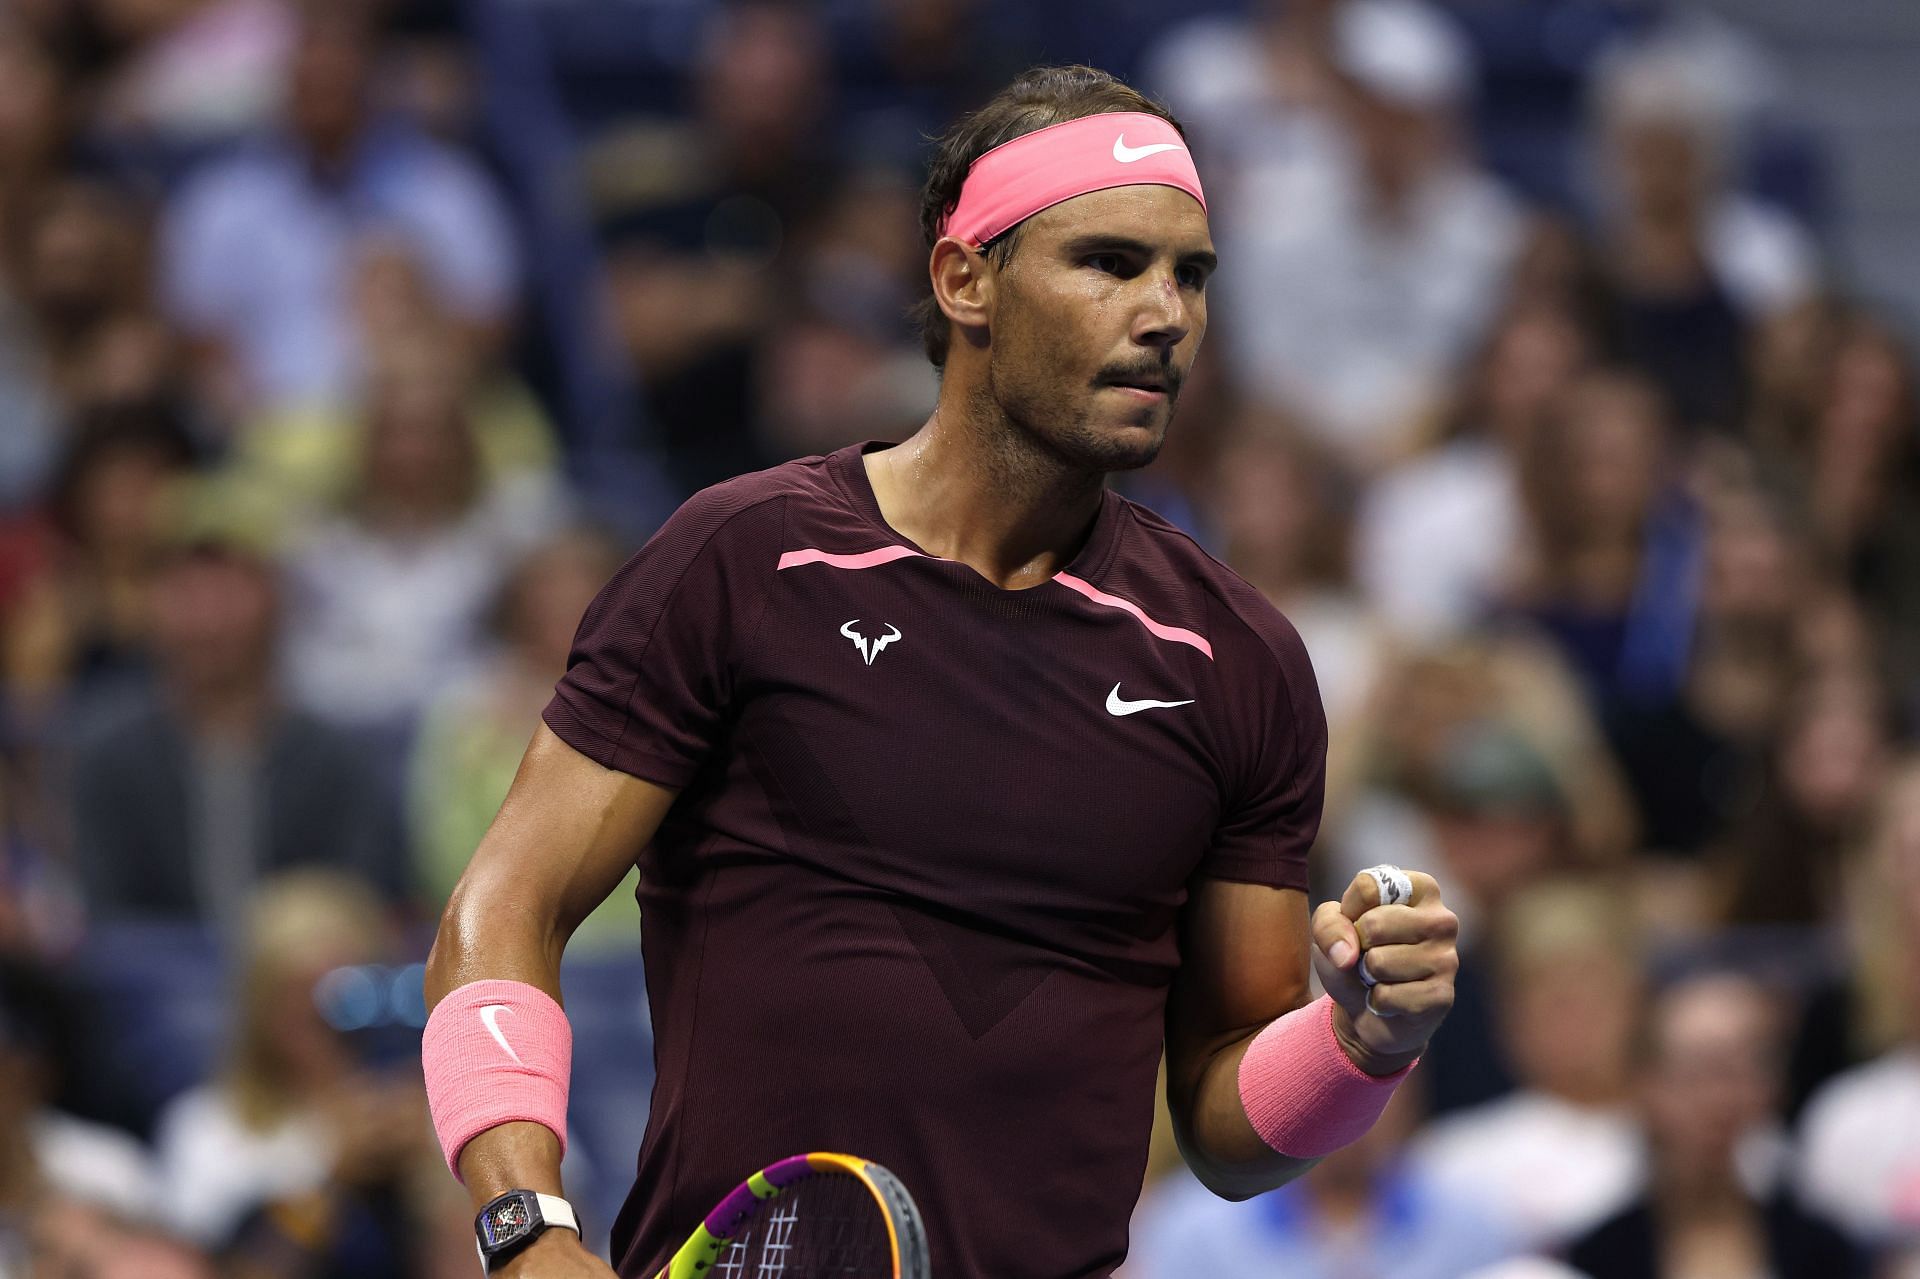 espada soplo Campo de minas Rafael Nadal's post-US Open outfit for rest of the 2022 season revealed